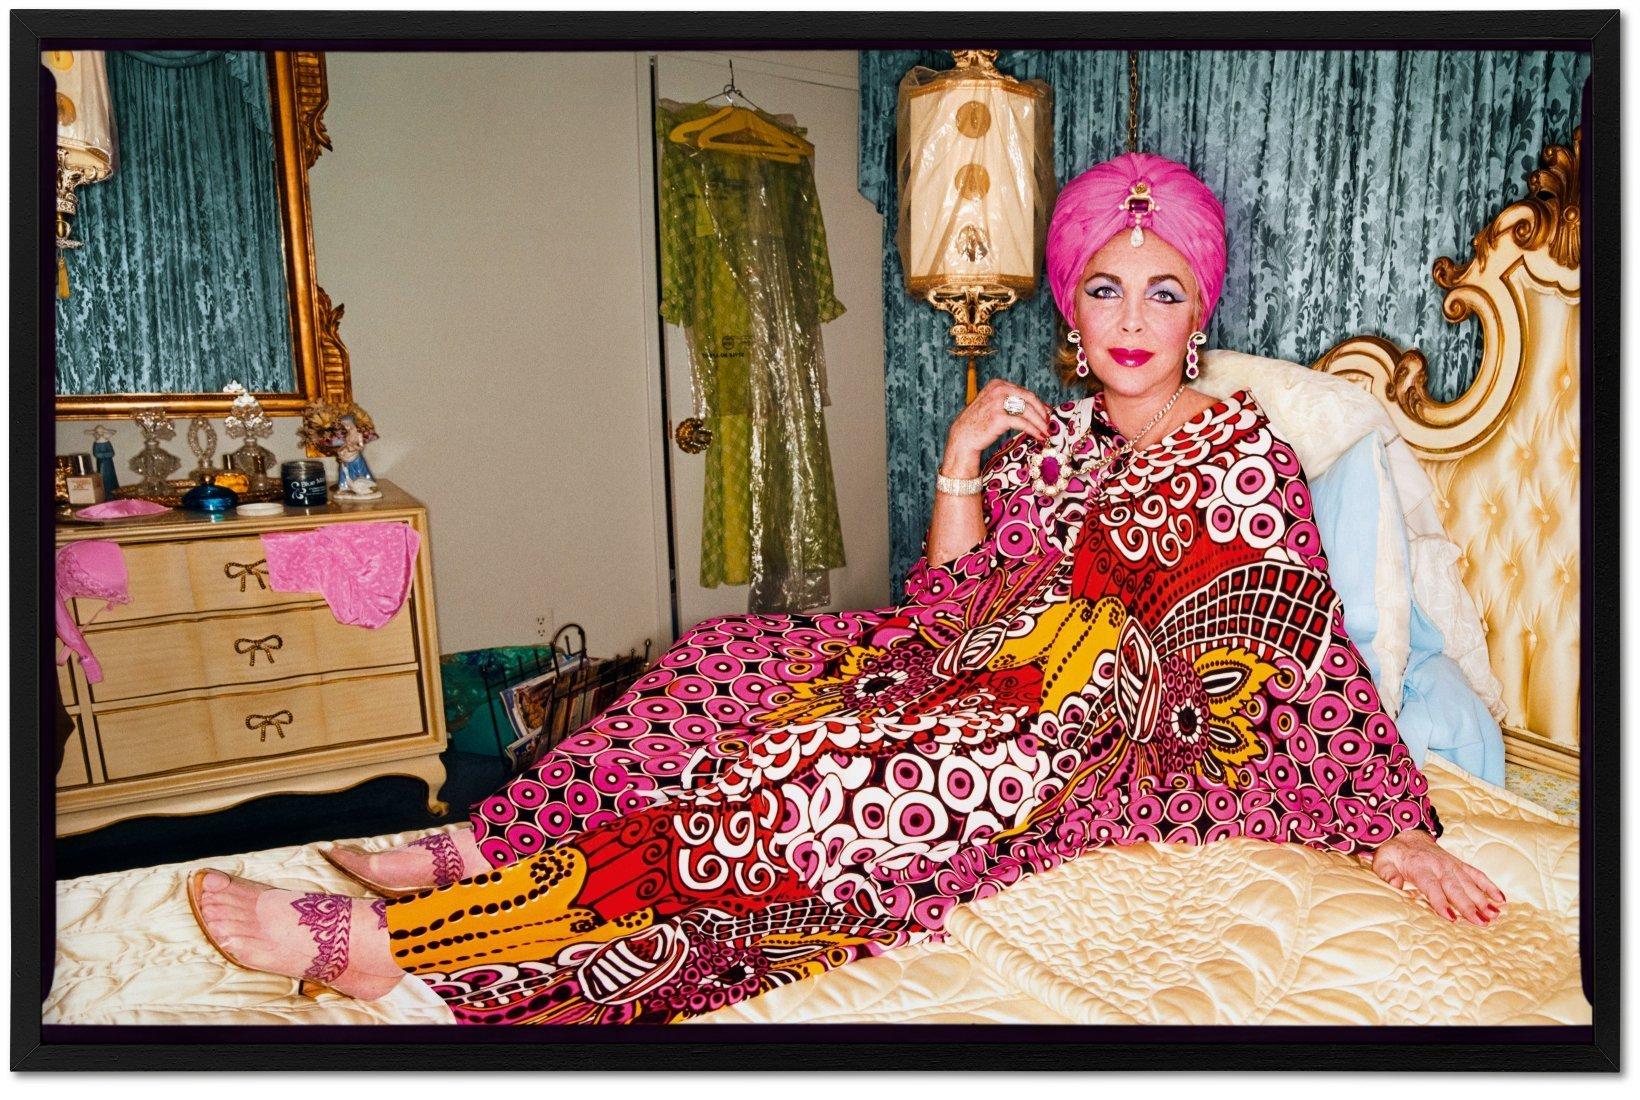 European David La Chapelle, Lost and Found, Good News, Art Edition For Sale